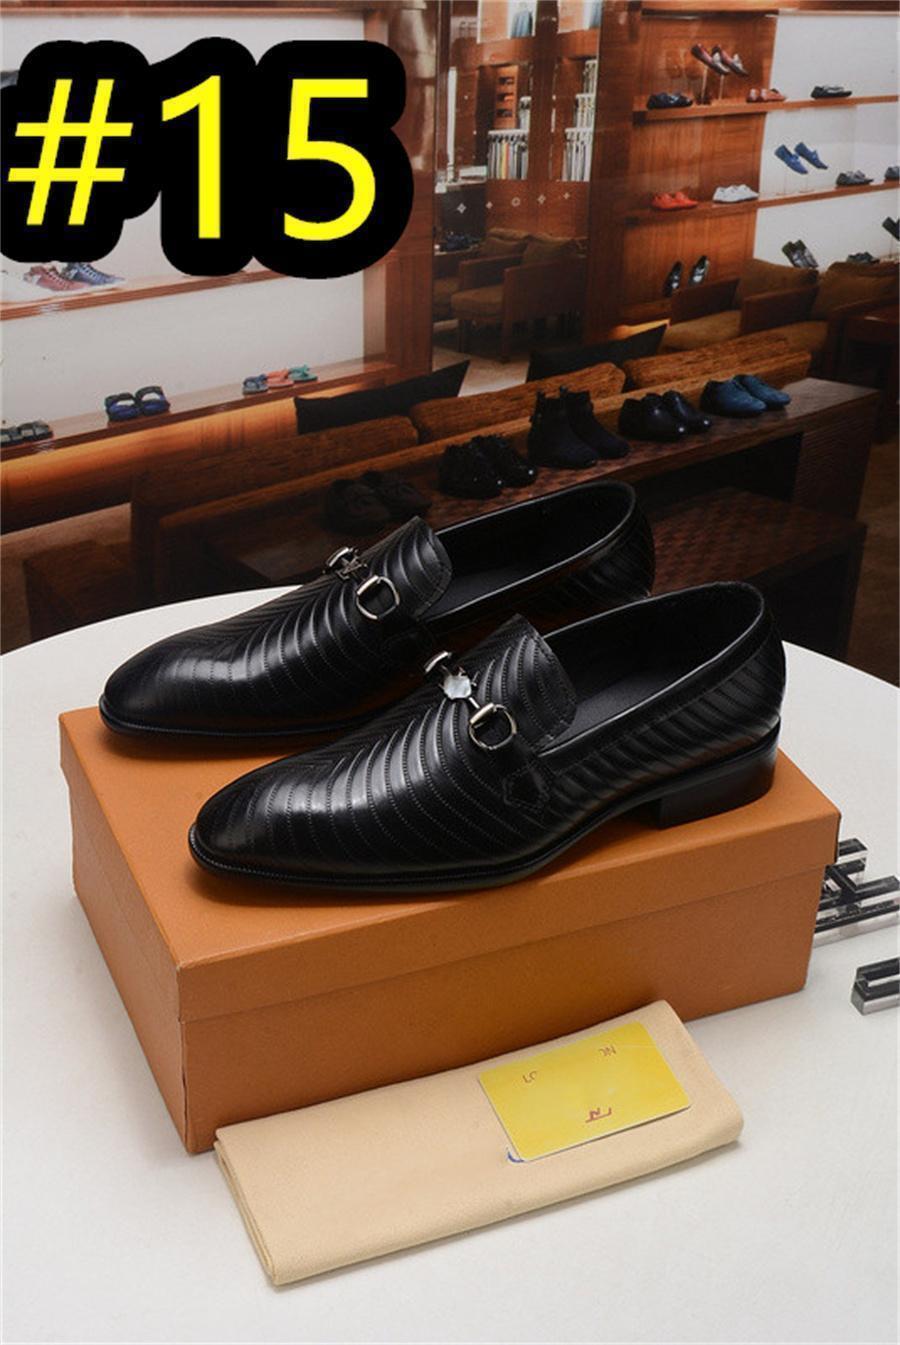 A4 28 Style Brown Tan Black Woven Design Loafers Summer Mens Wedding Groom Shoes Genuine Leather Male Dress Shoe With Tassel size 6.5-11